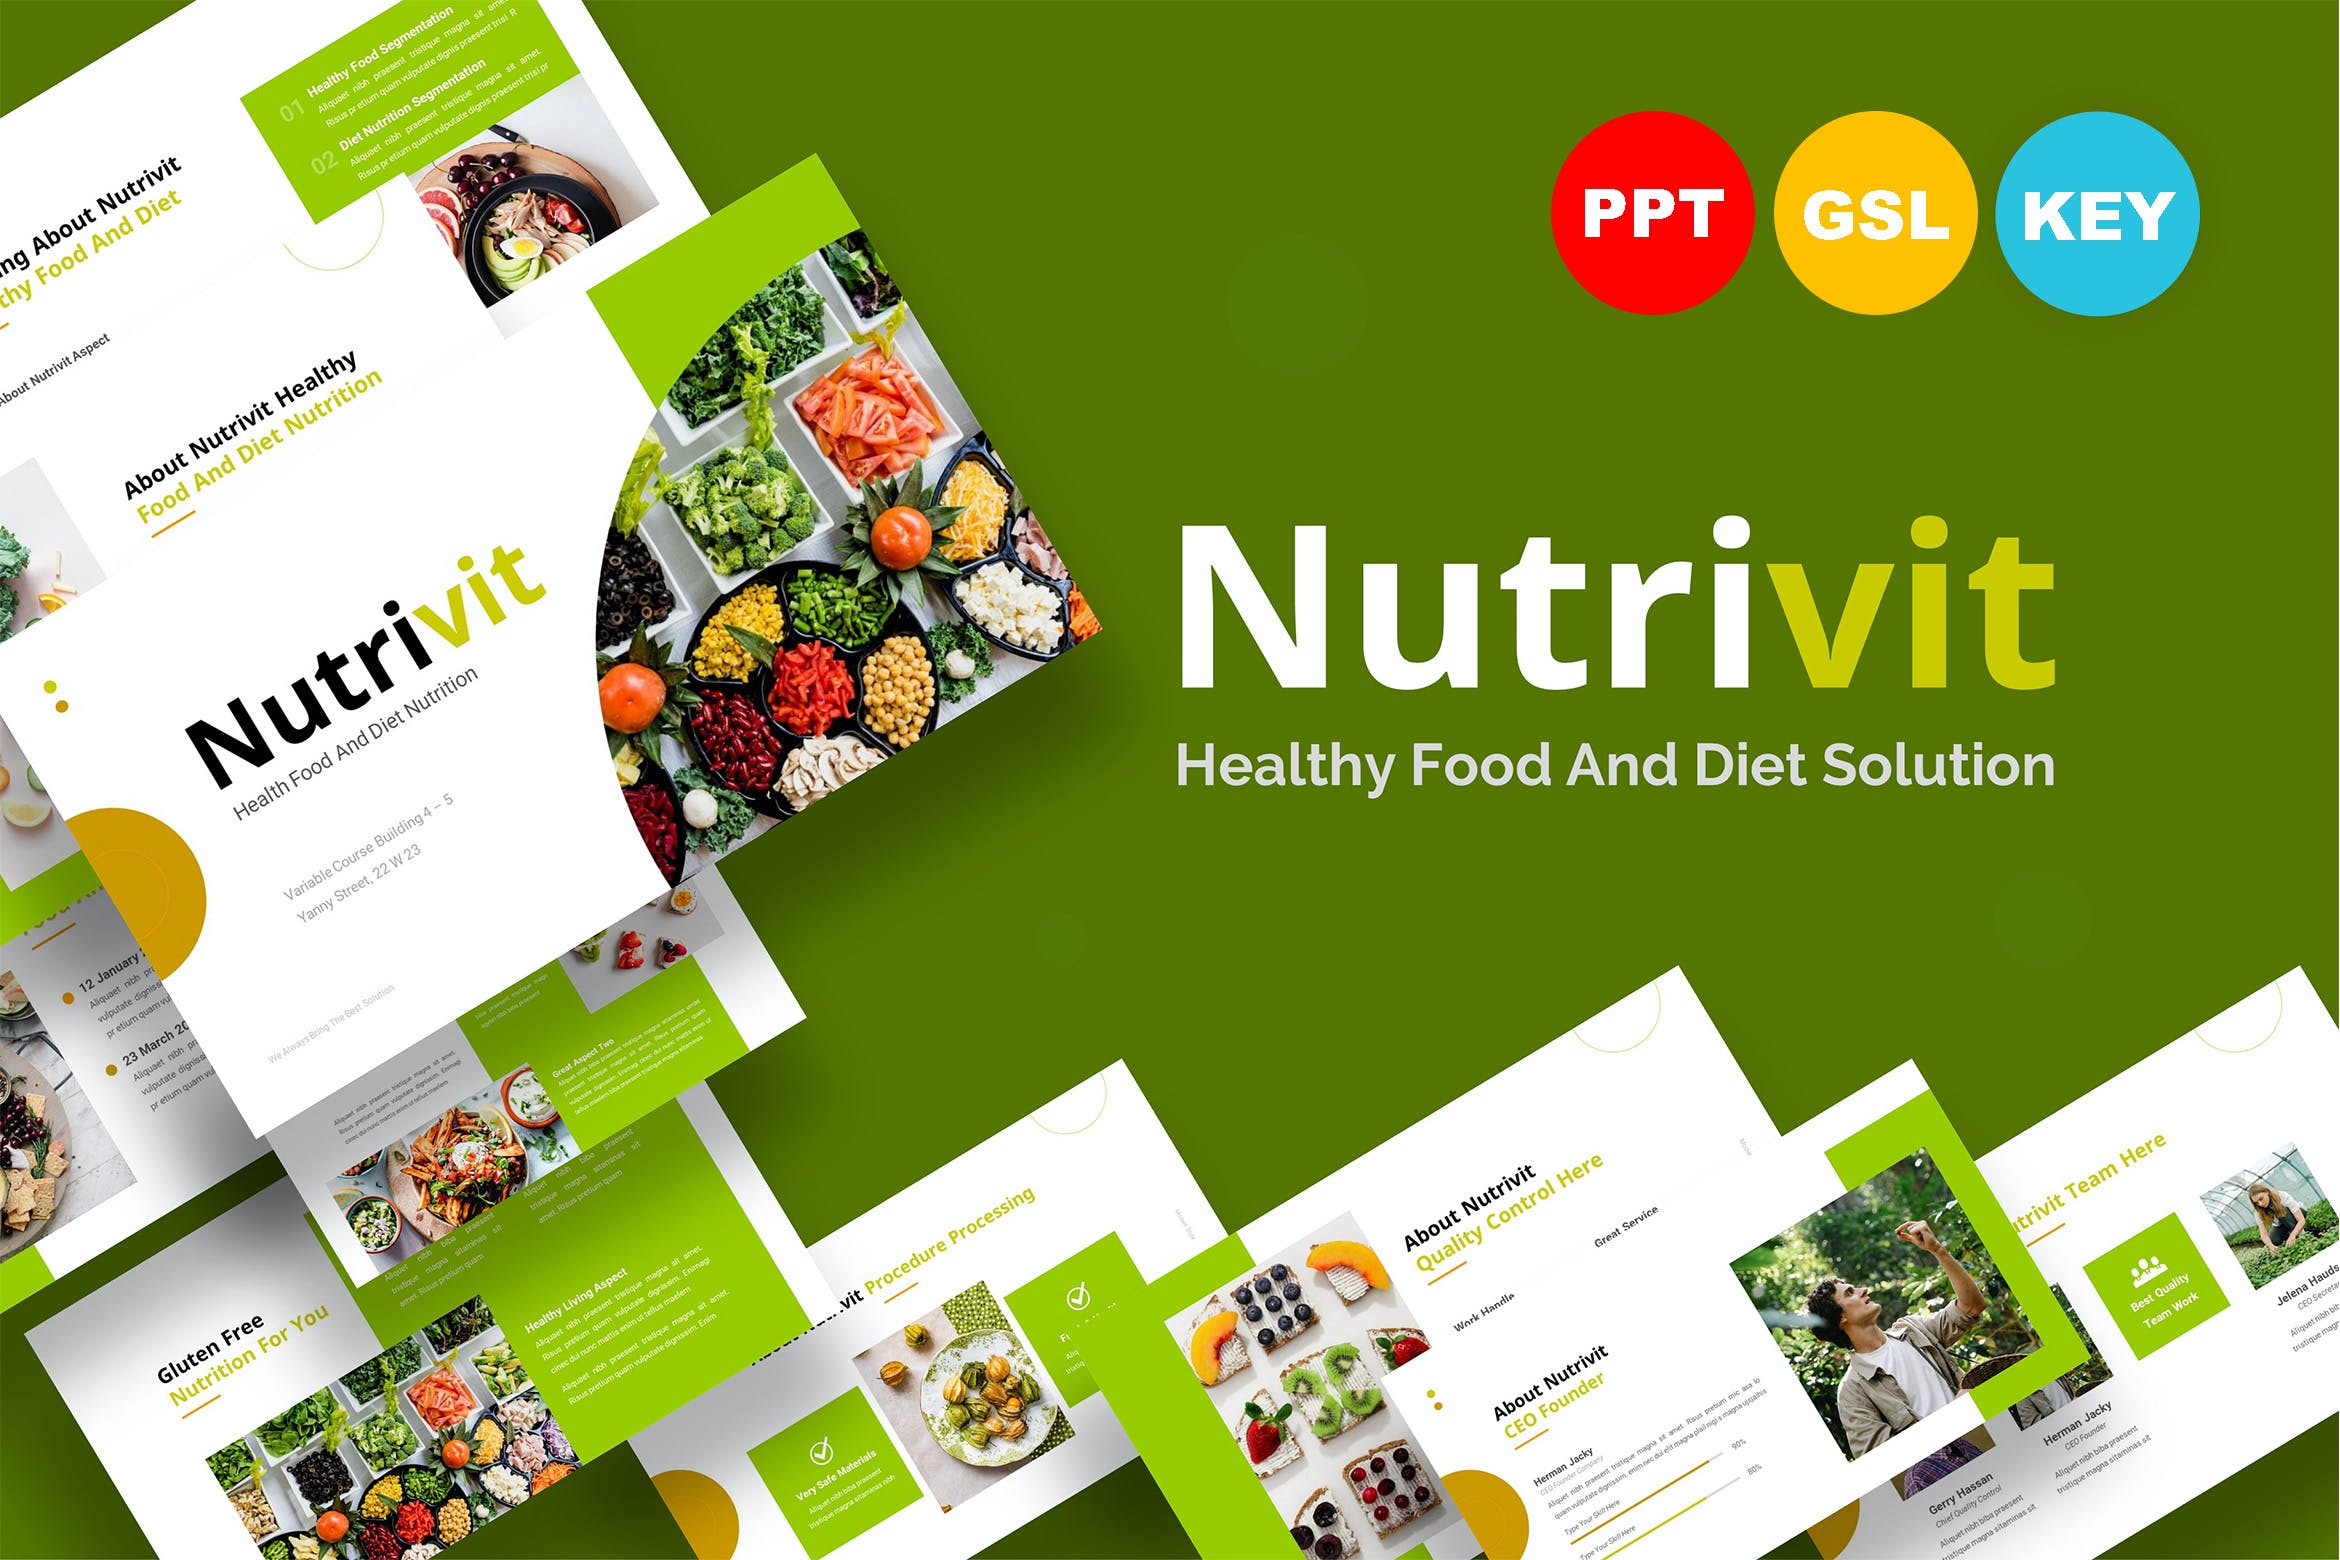 Cover image of Nutrivit Healthy Food And Nutrition - Presentation.